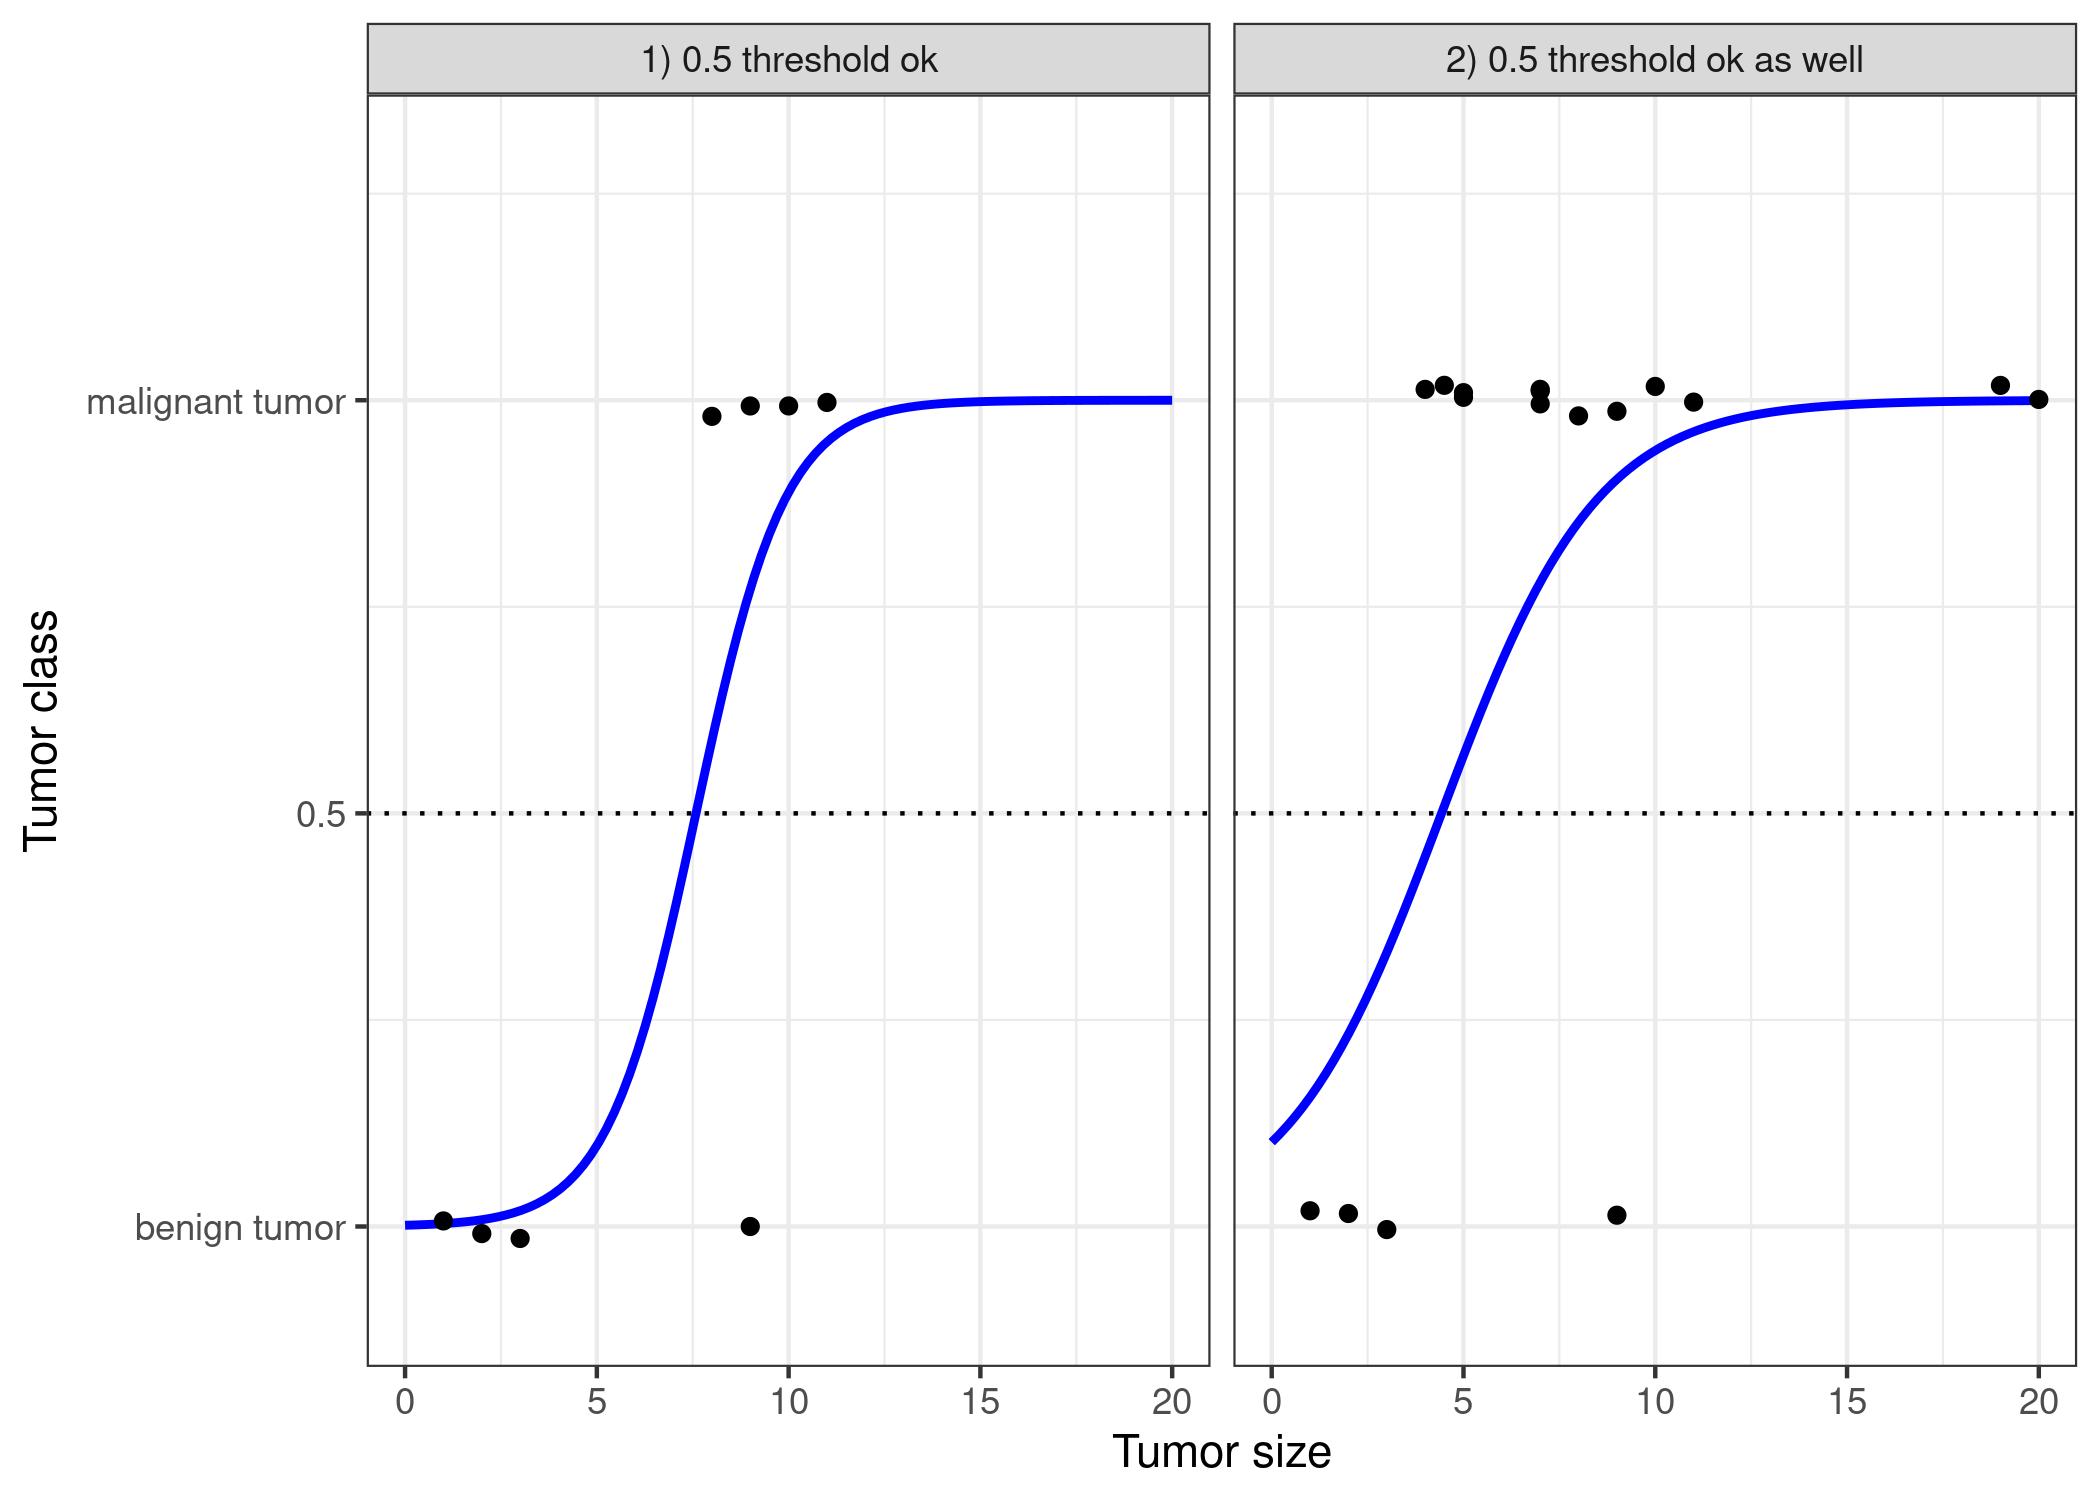 The logistic regression model finds the correct decision boundary between malignant and benign depending on tumor size. The line is the logistic function shifted and squeezed to fit the data.